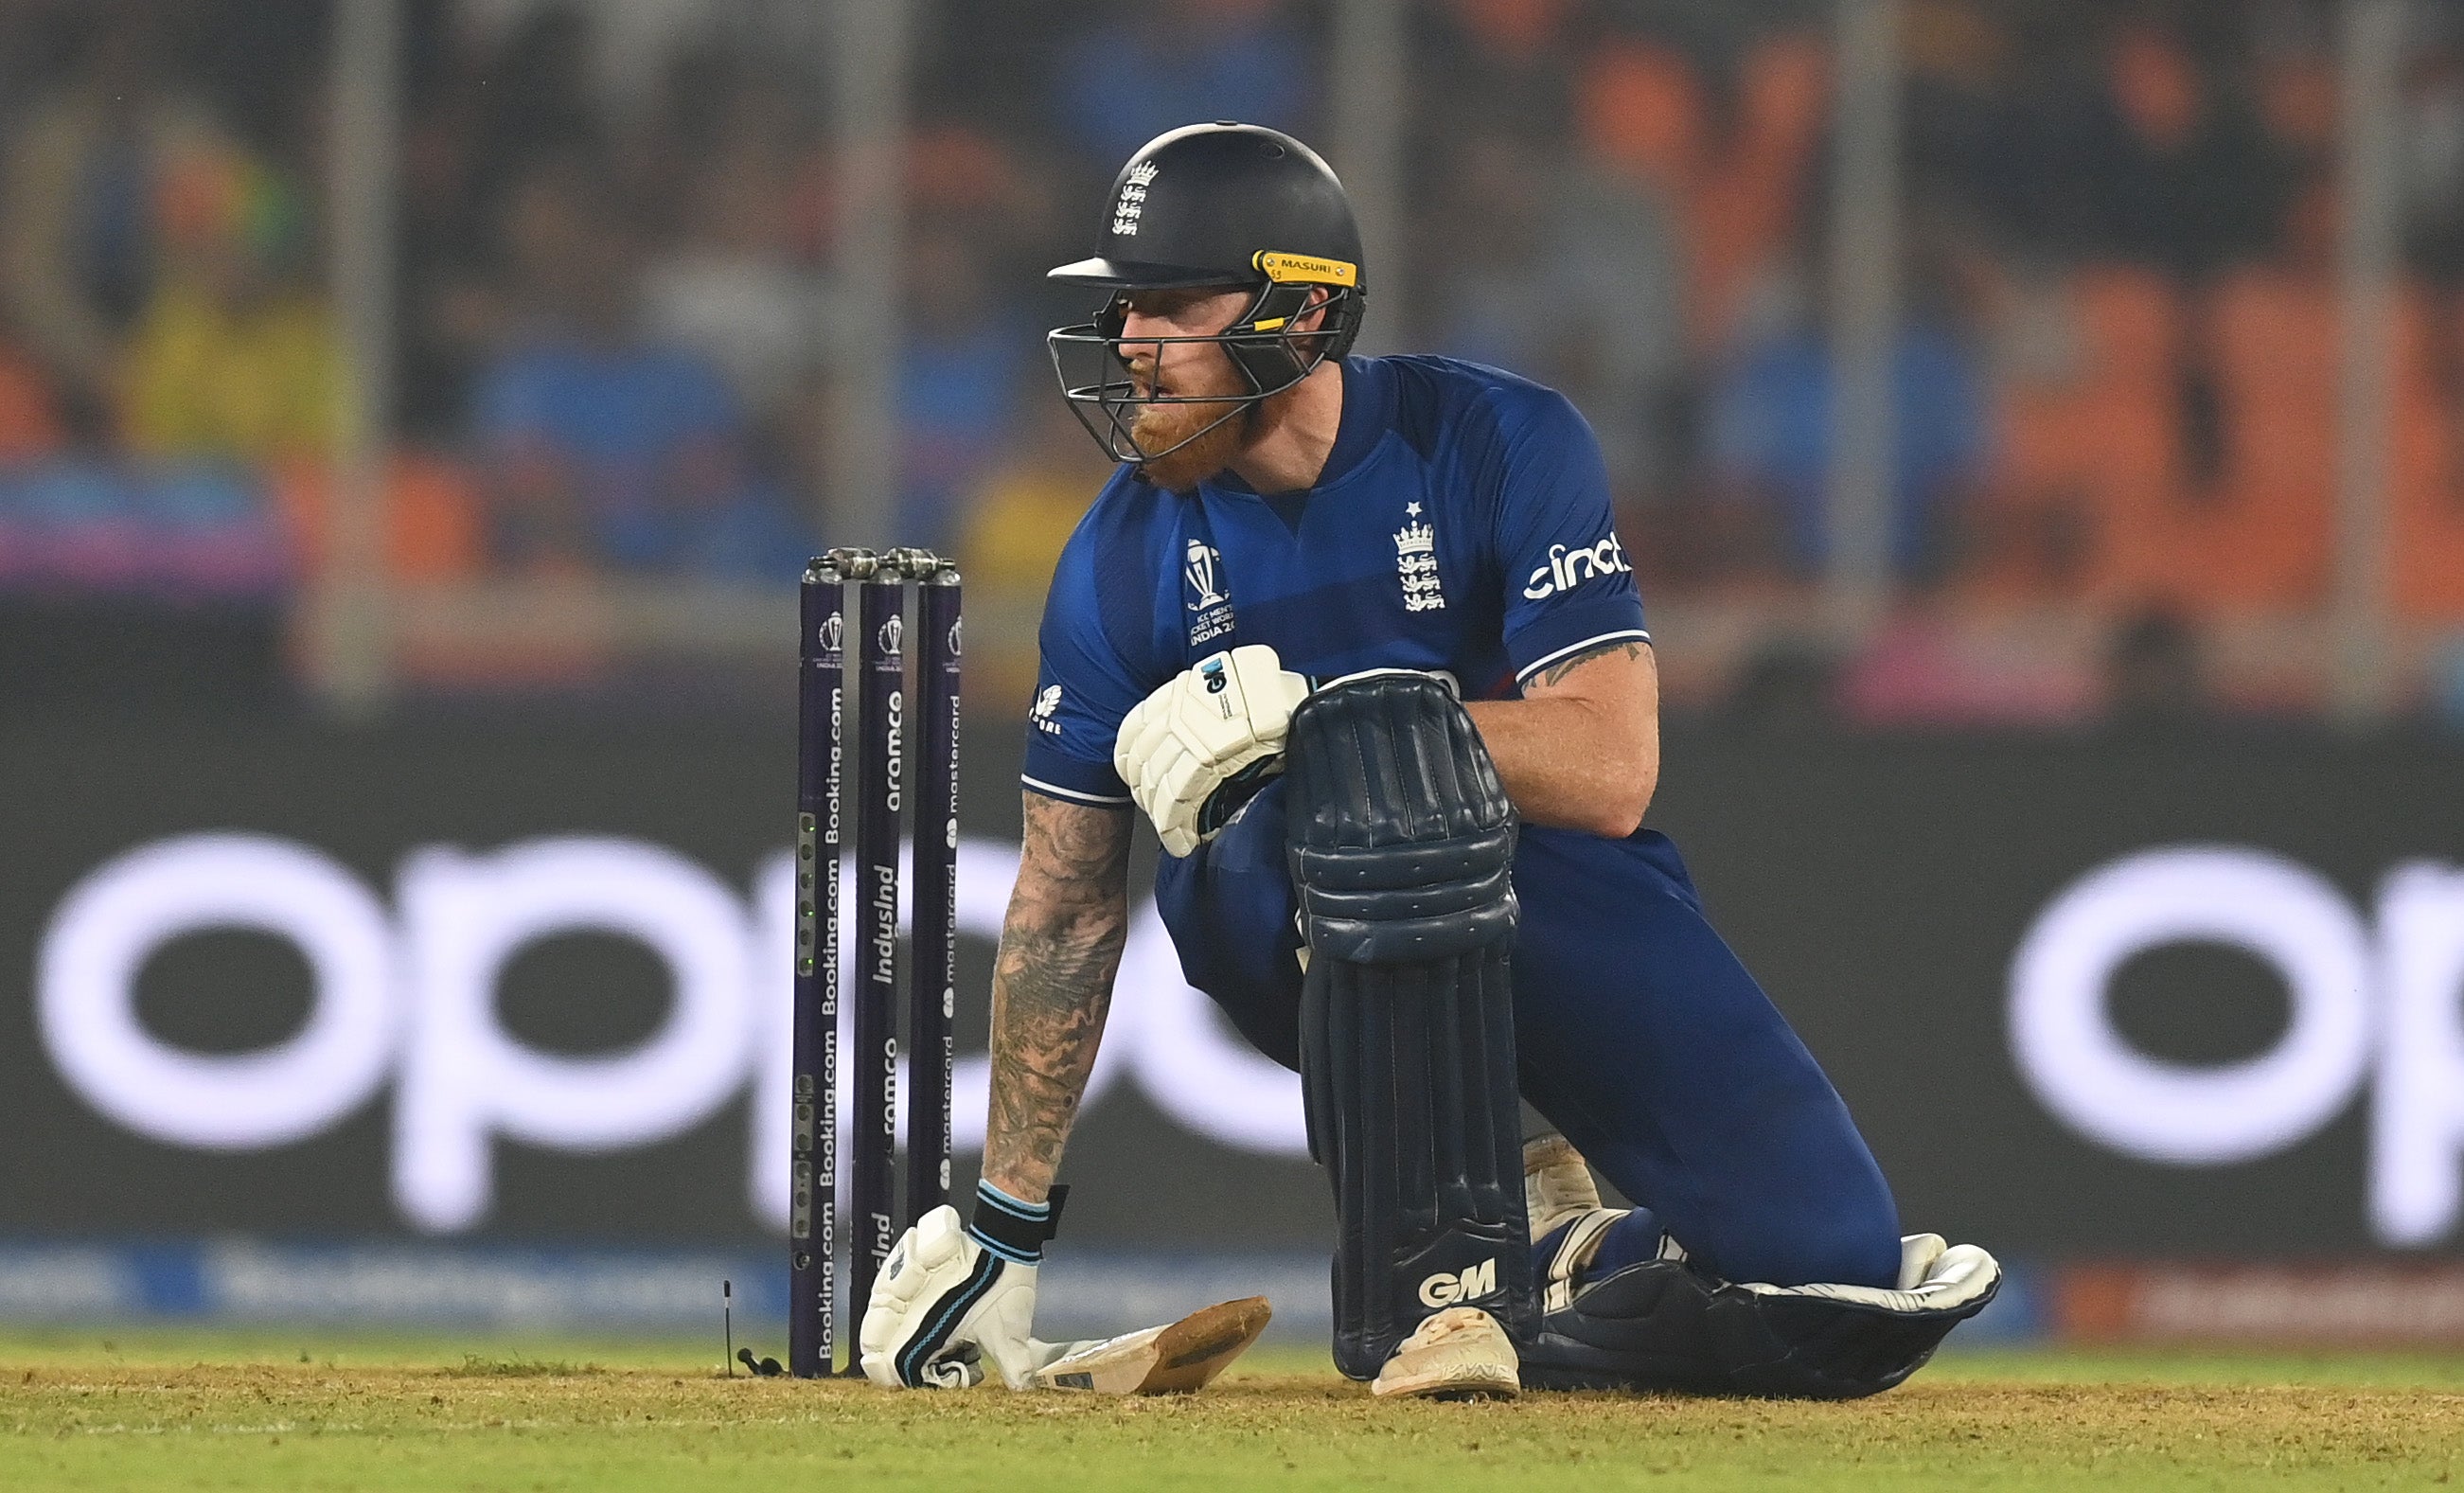 Ben Stokes was out for 64 as England tried to chase 287 to win